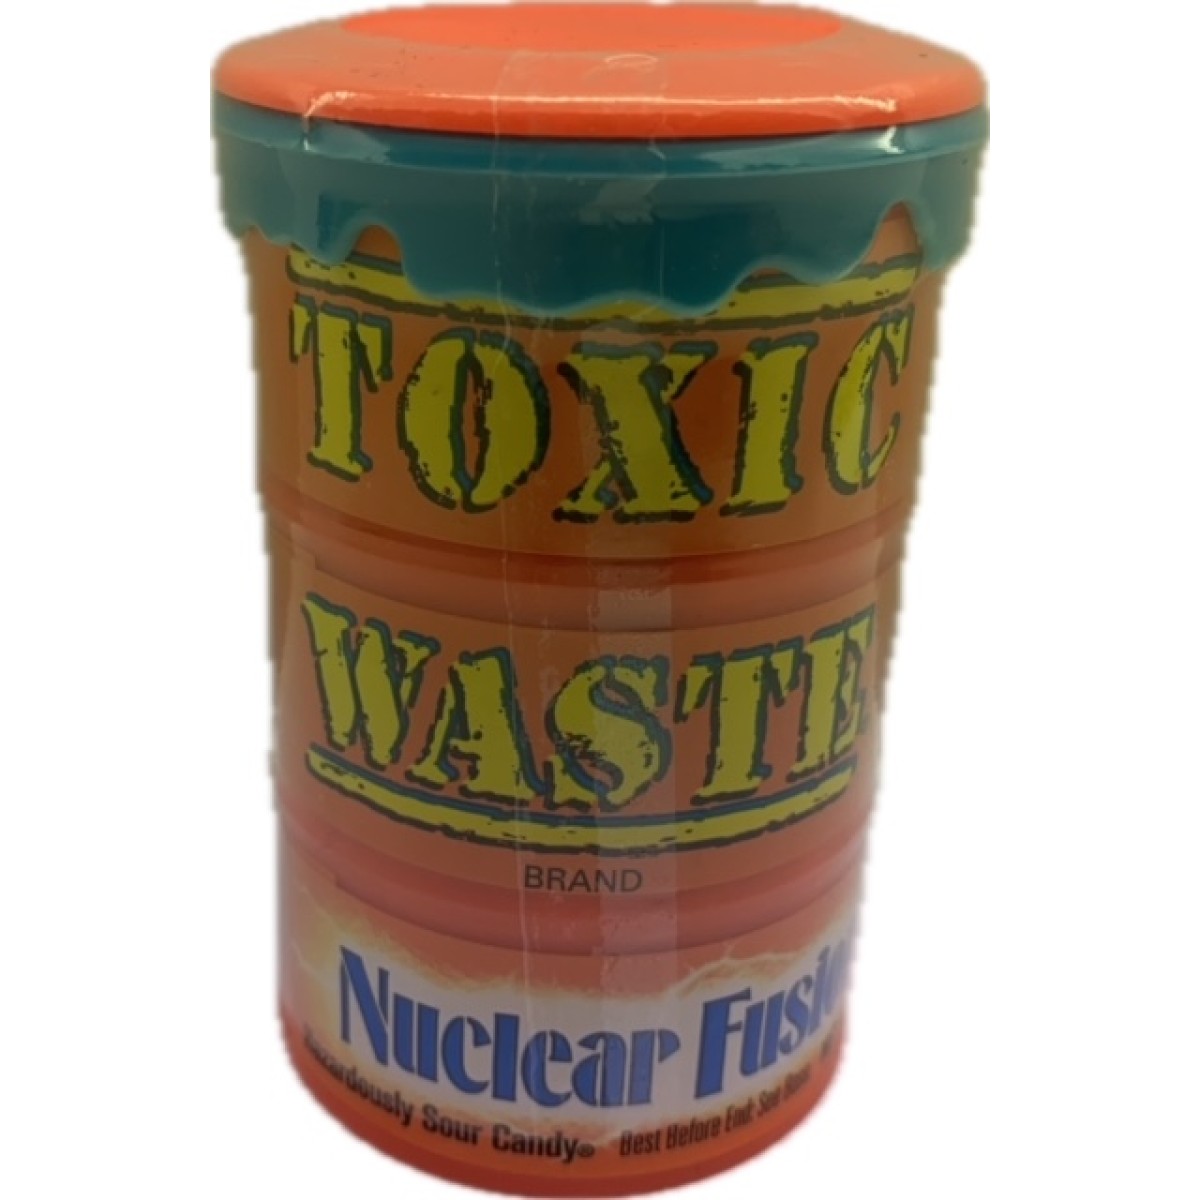 Toxic waste nuclear fusion